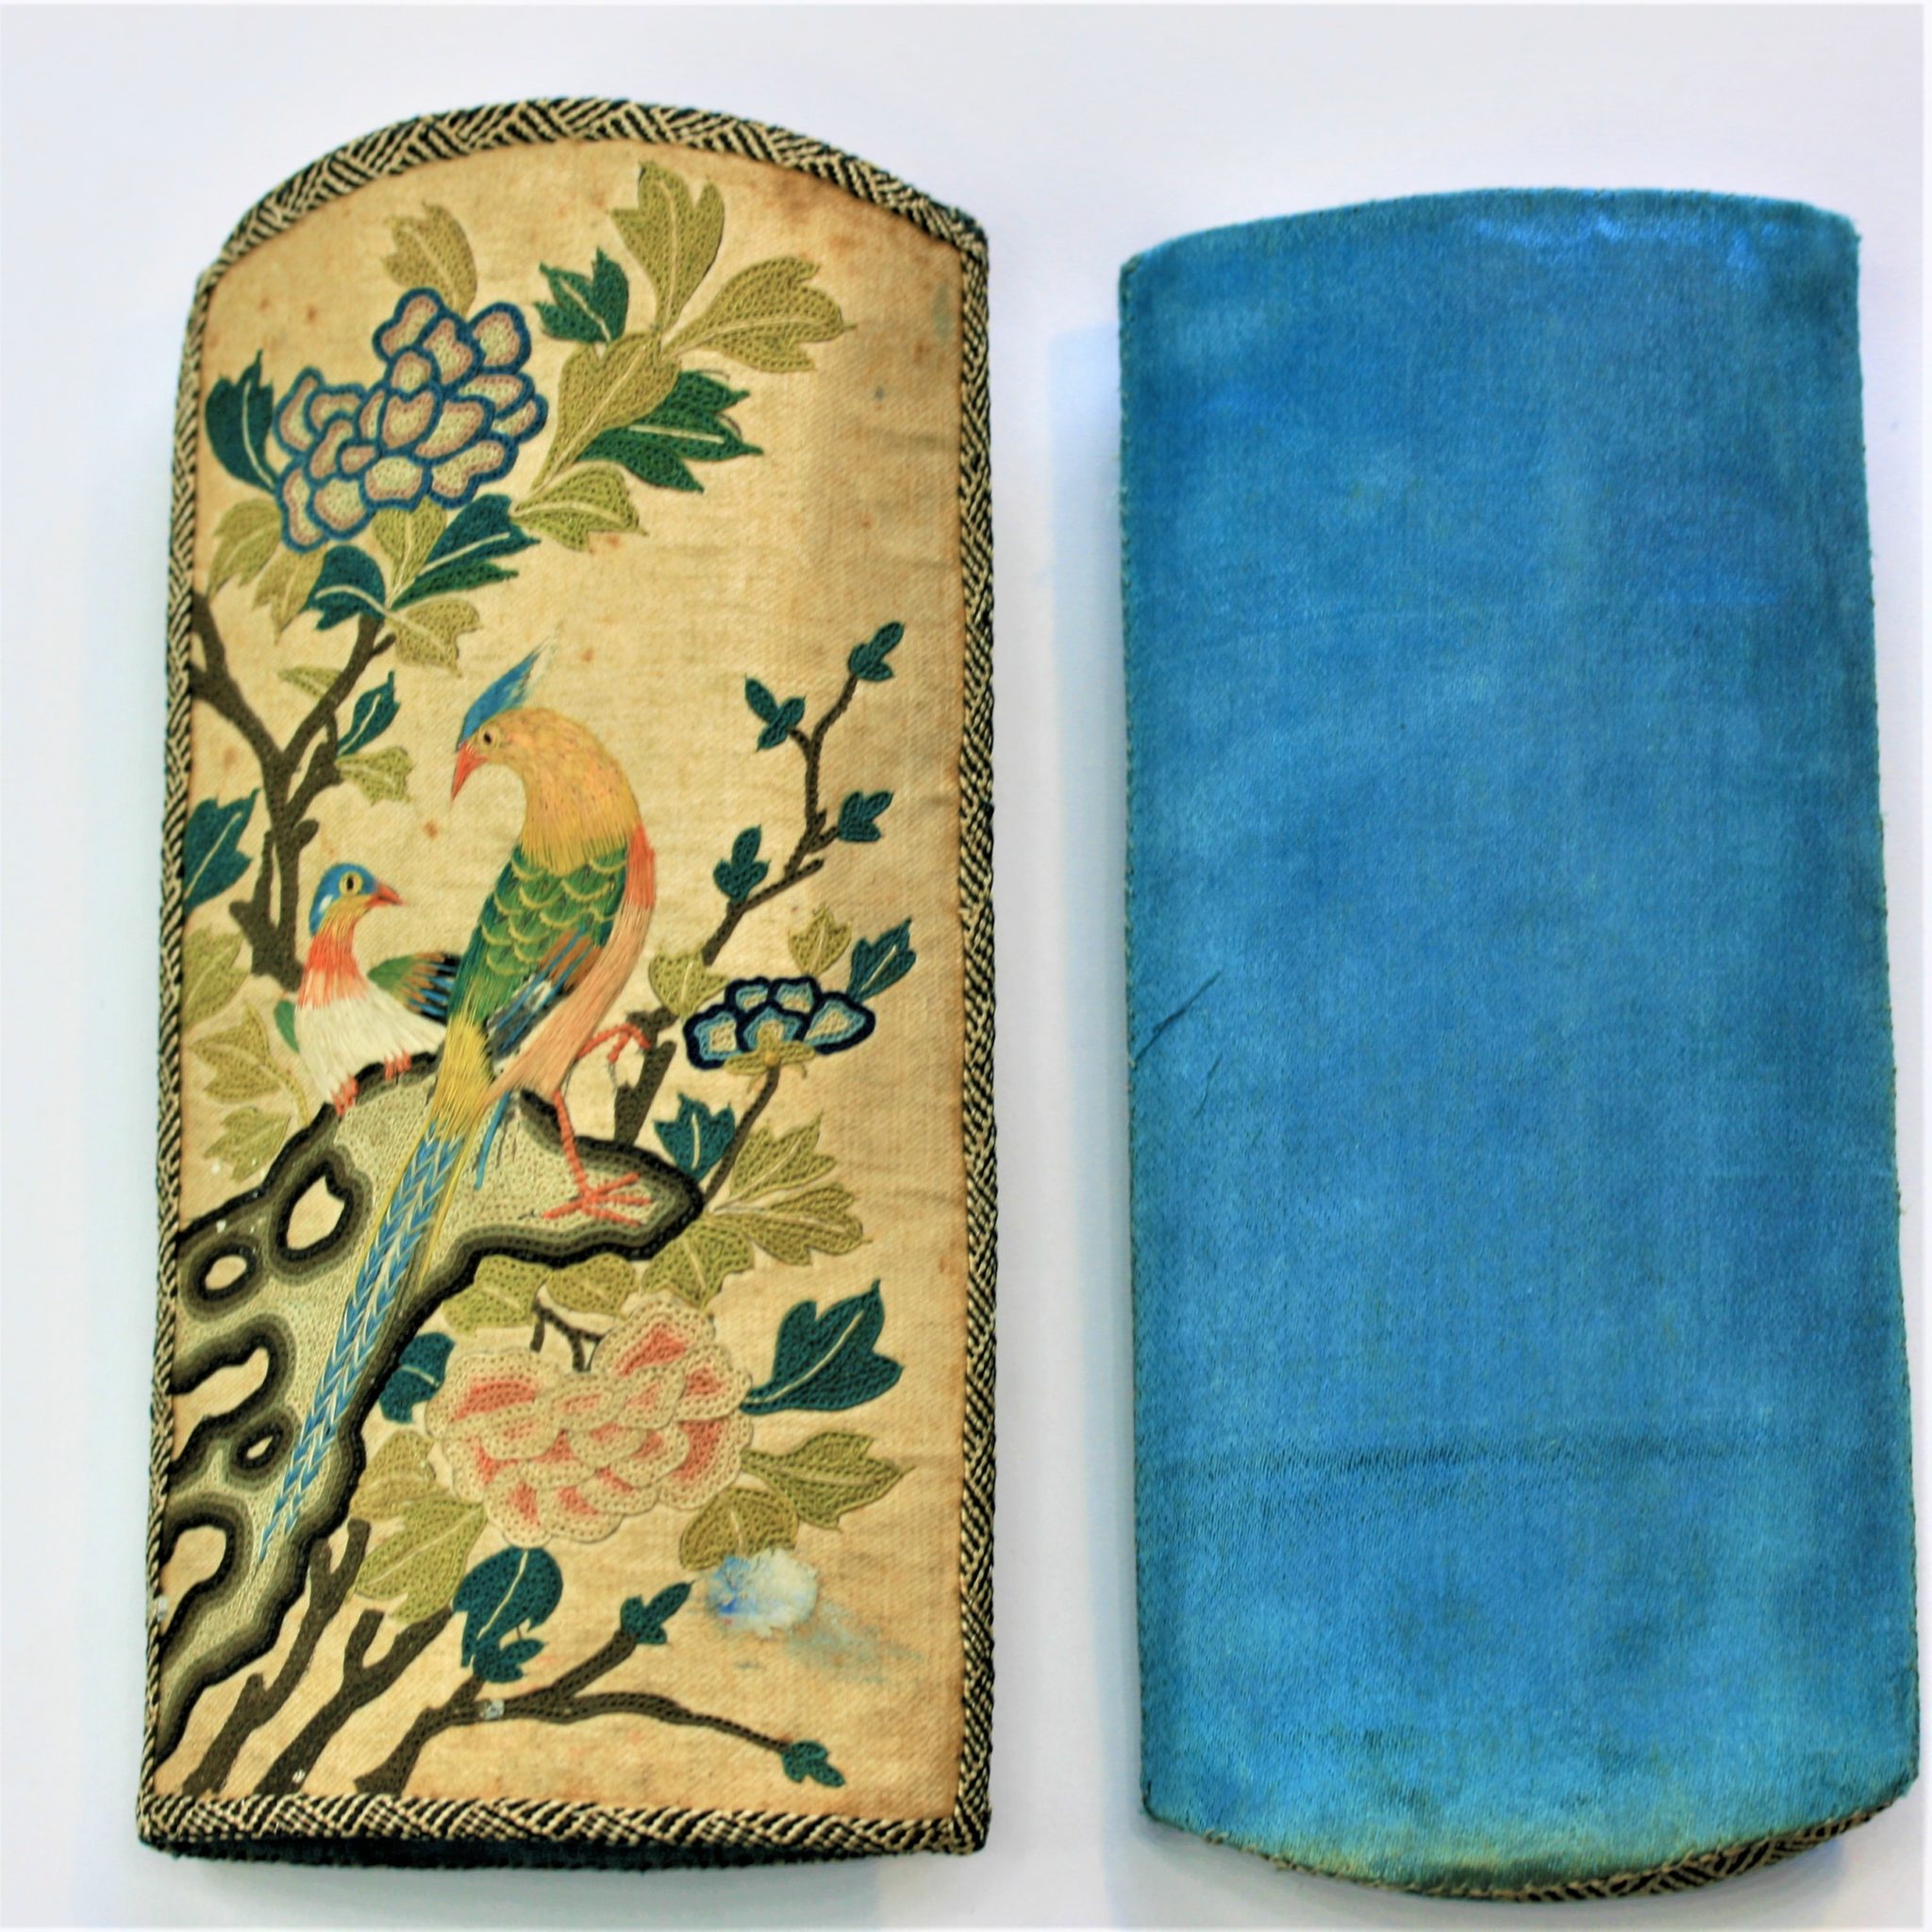 TOP QUALITY FINE SEWING  CHINESE EMBROIDERY SPECTACLES CASE ETUI WITH SLEEVE C 1840,